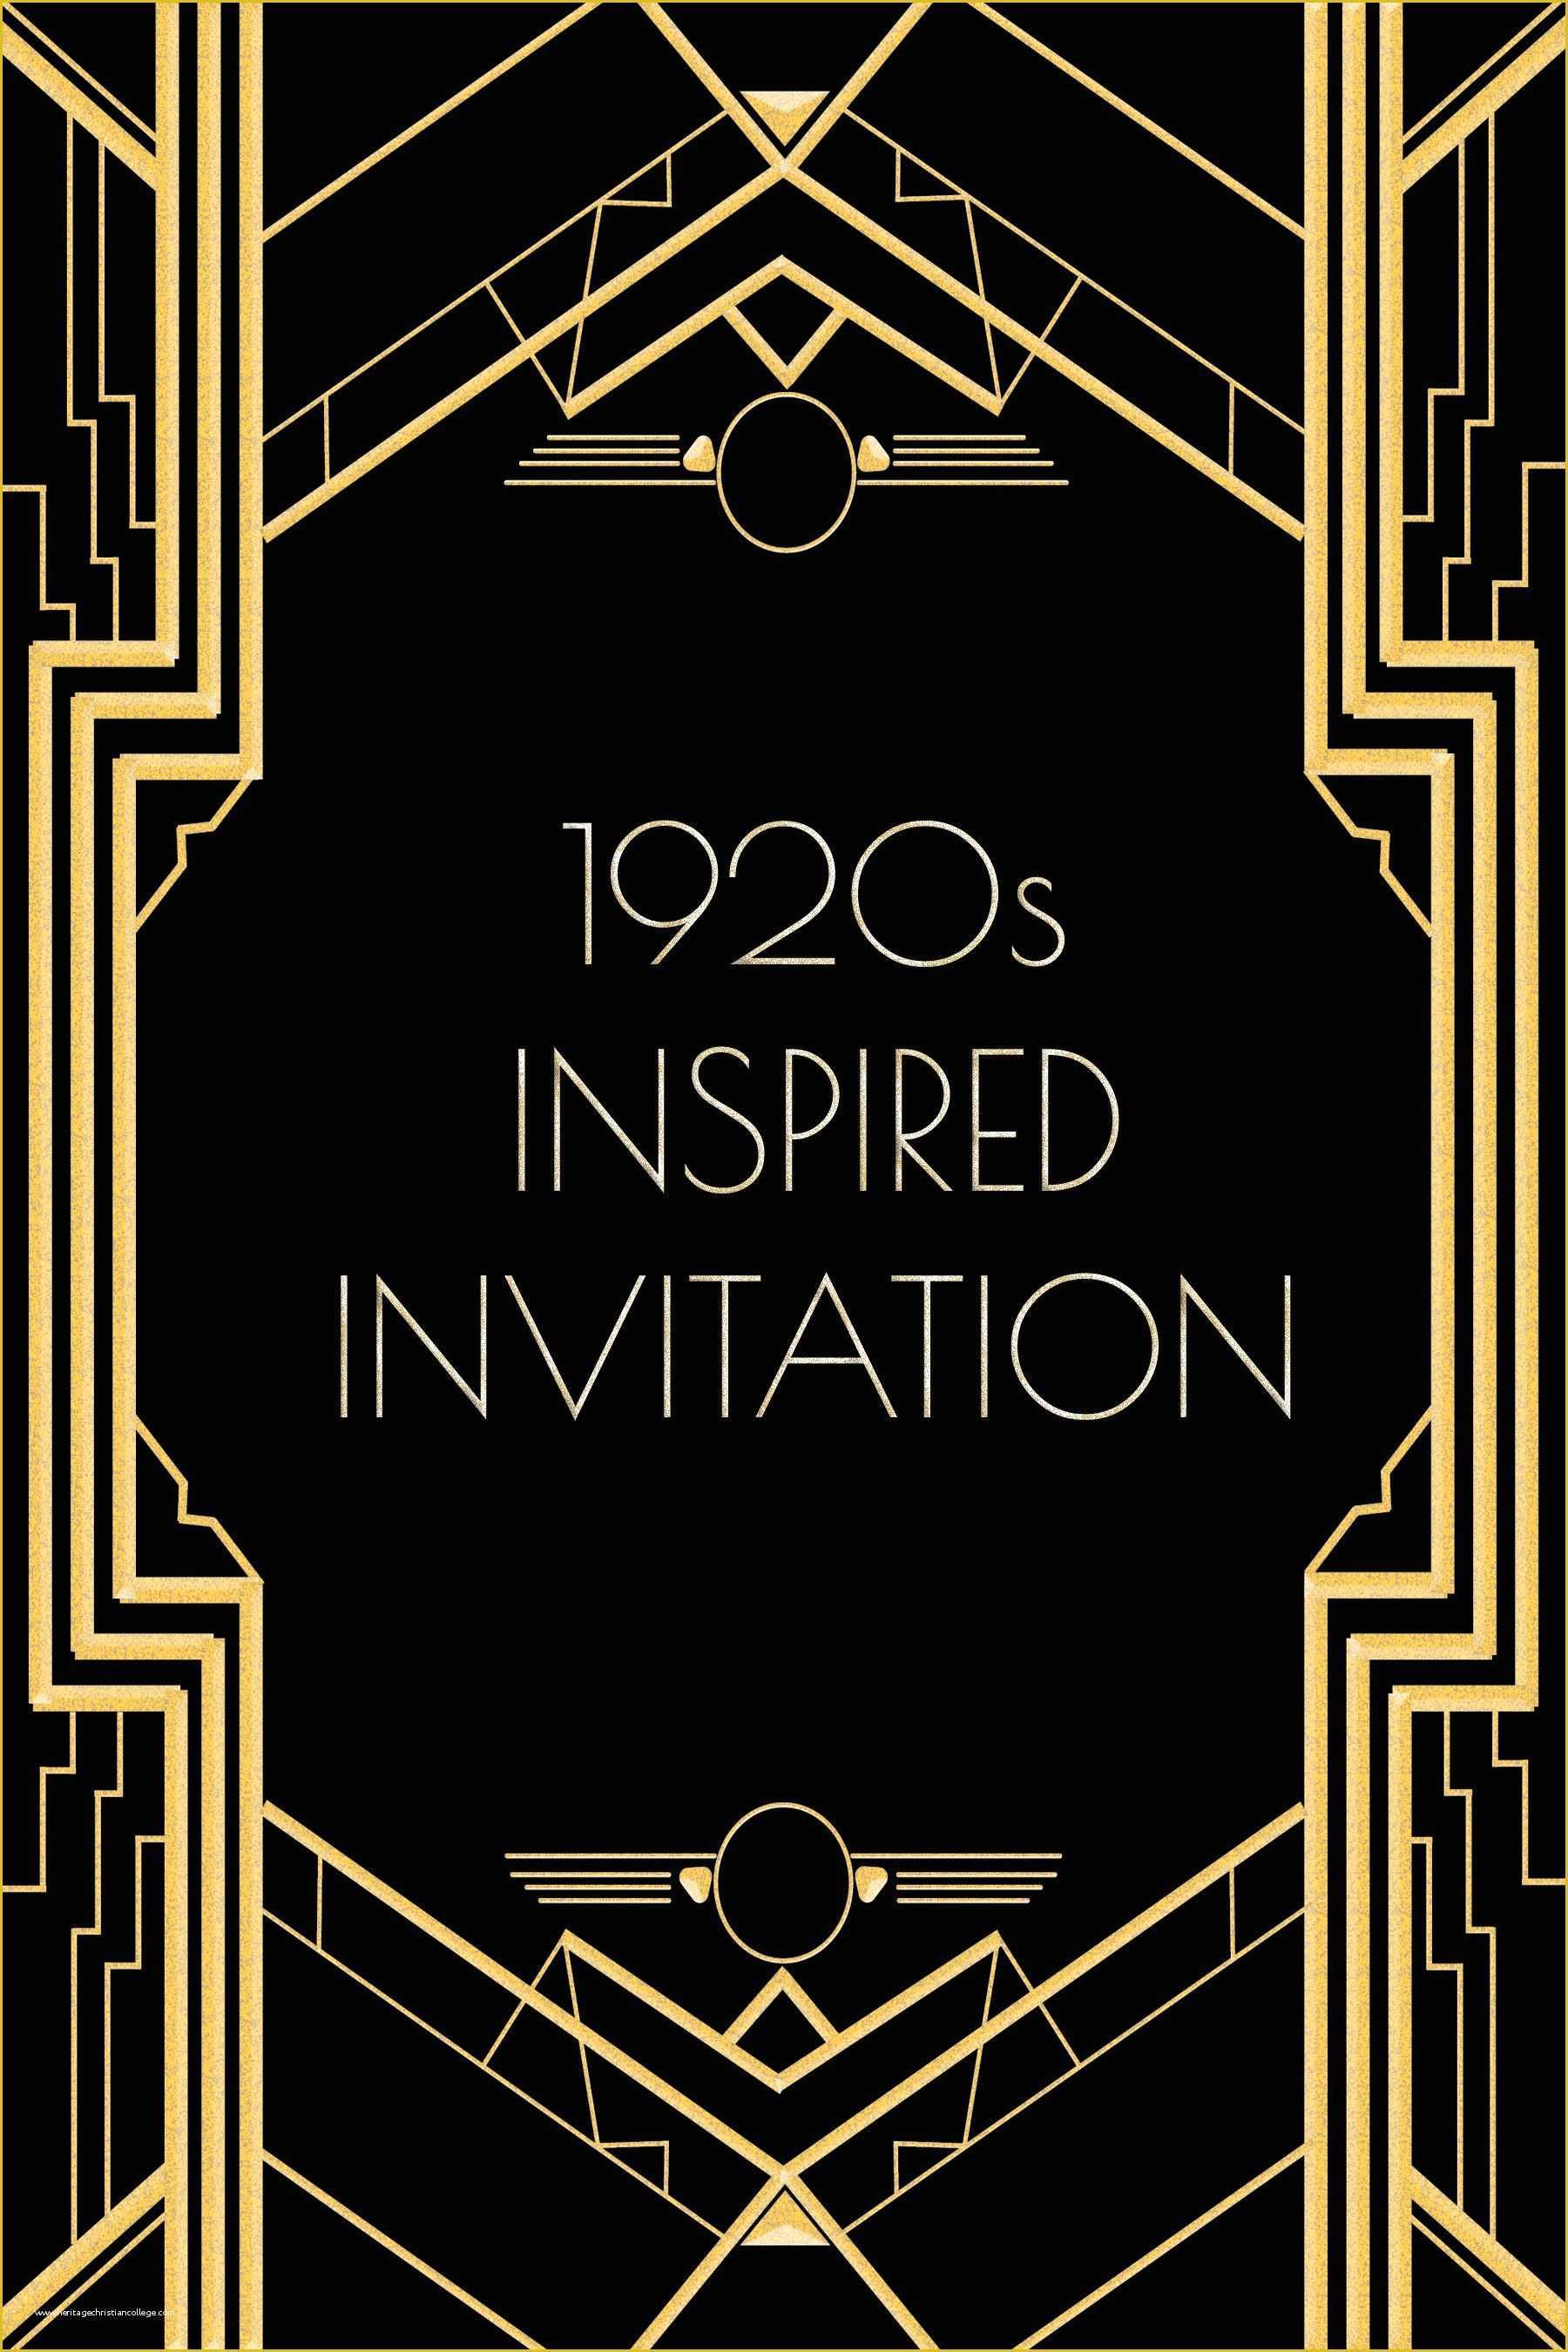 1920s Party Invitation Template Free Of Use This 1920s Inspired Invitation Template for A Gatsby